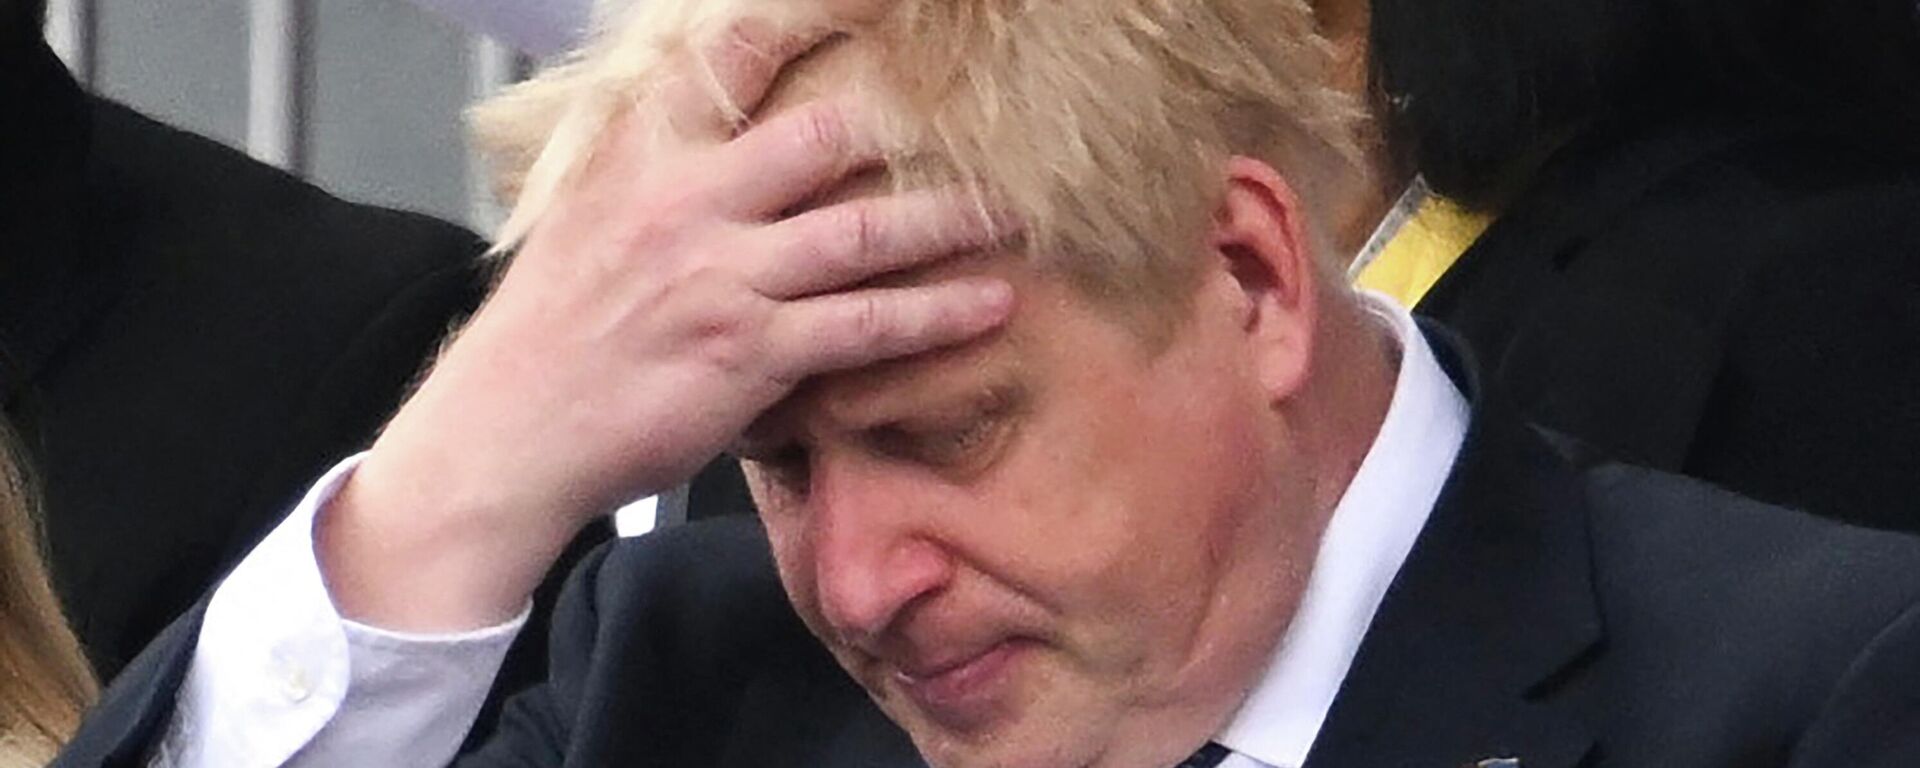 (FILES) In this file photo taken on June 5, 2022 shows Britain's Prime Minister Boris Johnson reacts during the Platinum Pageant in London on June 5, 2022 as part of Queen Elizabeth II's platinum jubilee celebrations - Sputnik International, 1920, 06.06.2022